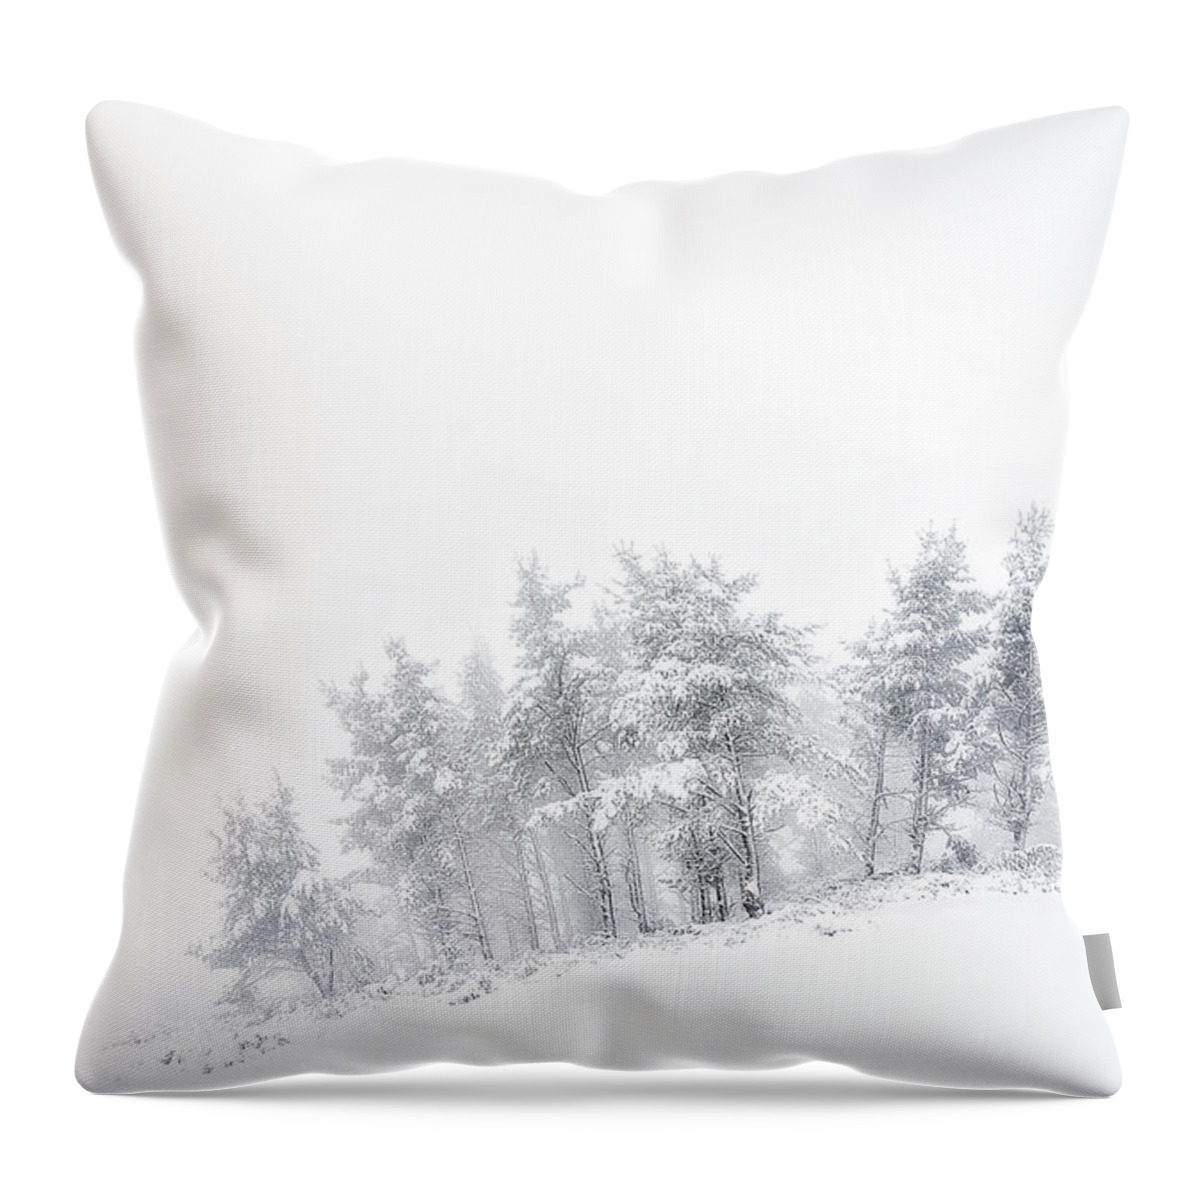 Winter Throw Pillow featuring the photograph The minimal forest by Mikel Martinez de Osaba